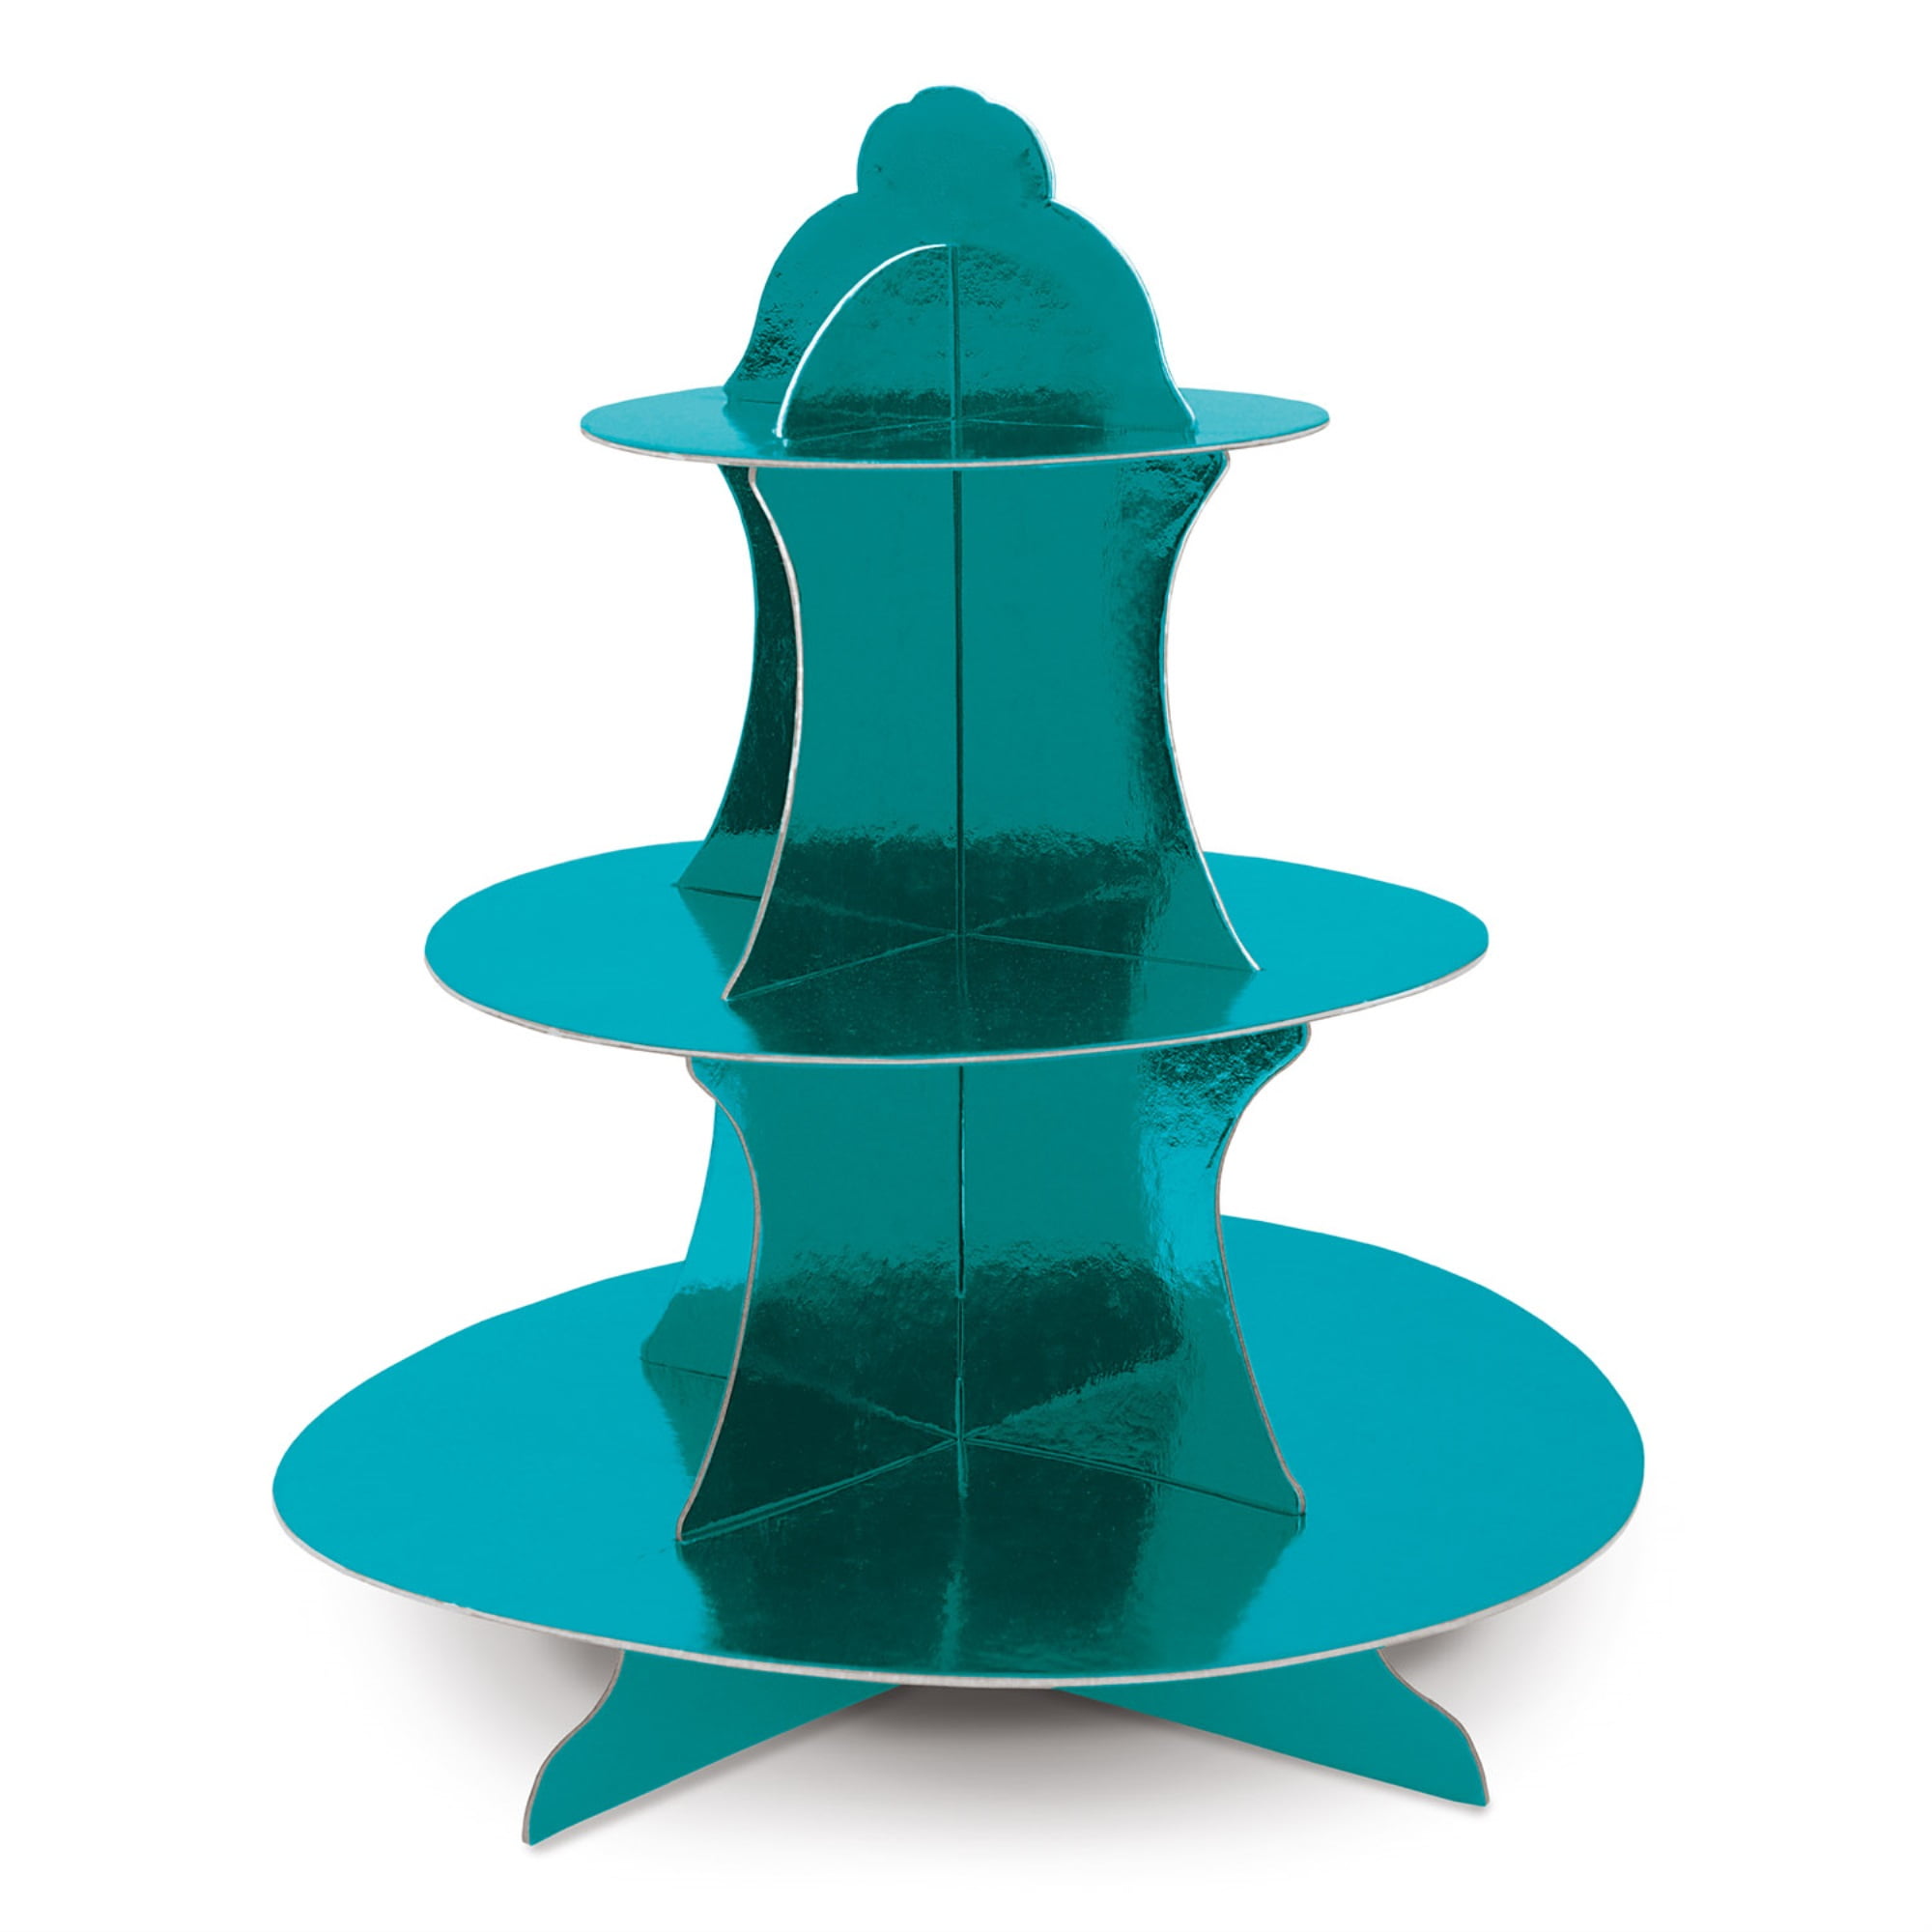 Picture of Beistle 59990-T Metallic Cupcake Stand, Turquoise